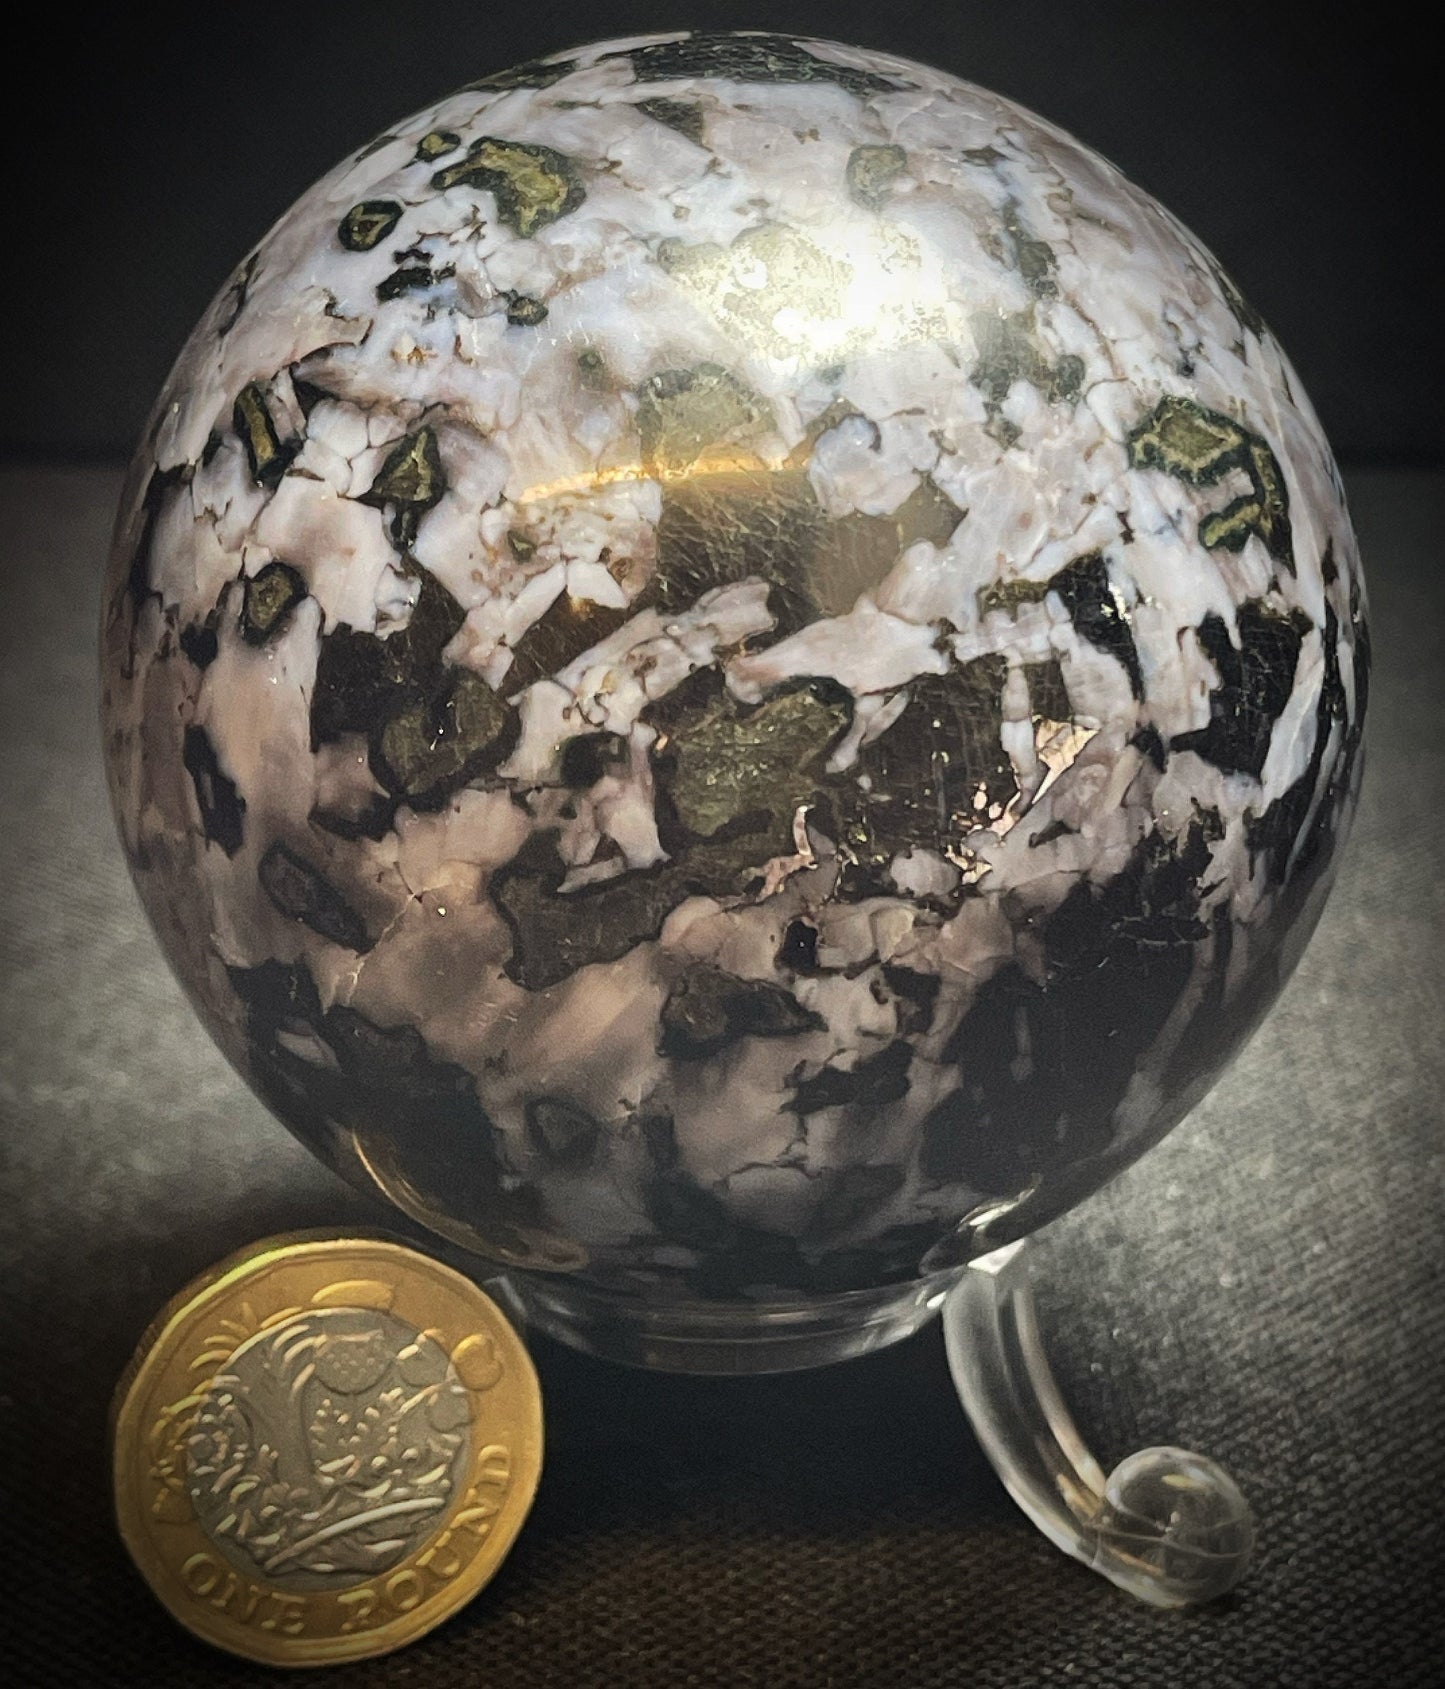 Gorgeous Polished Indigo Gabbro (Mystic Merlinite) Sphere From Madagascar Home Décor (Stand Included)